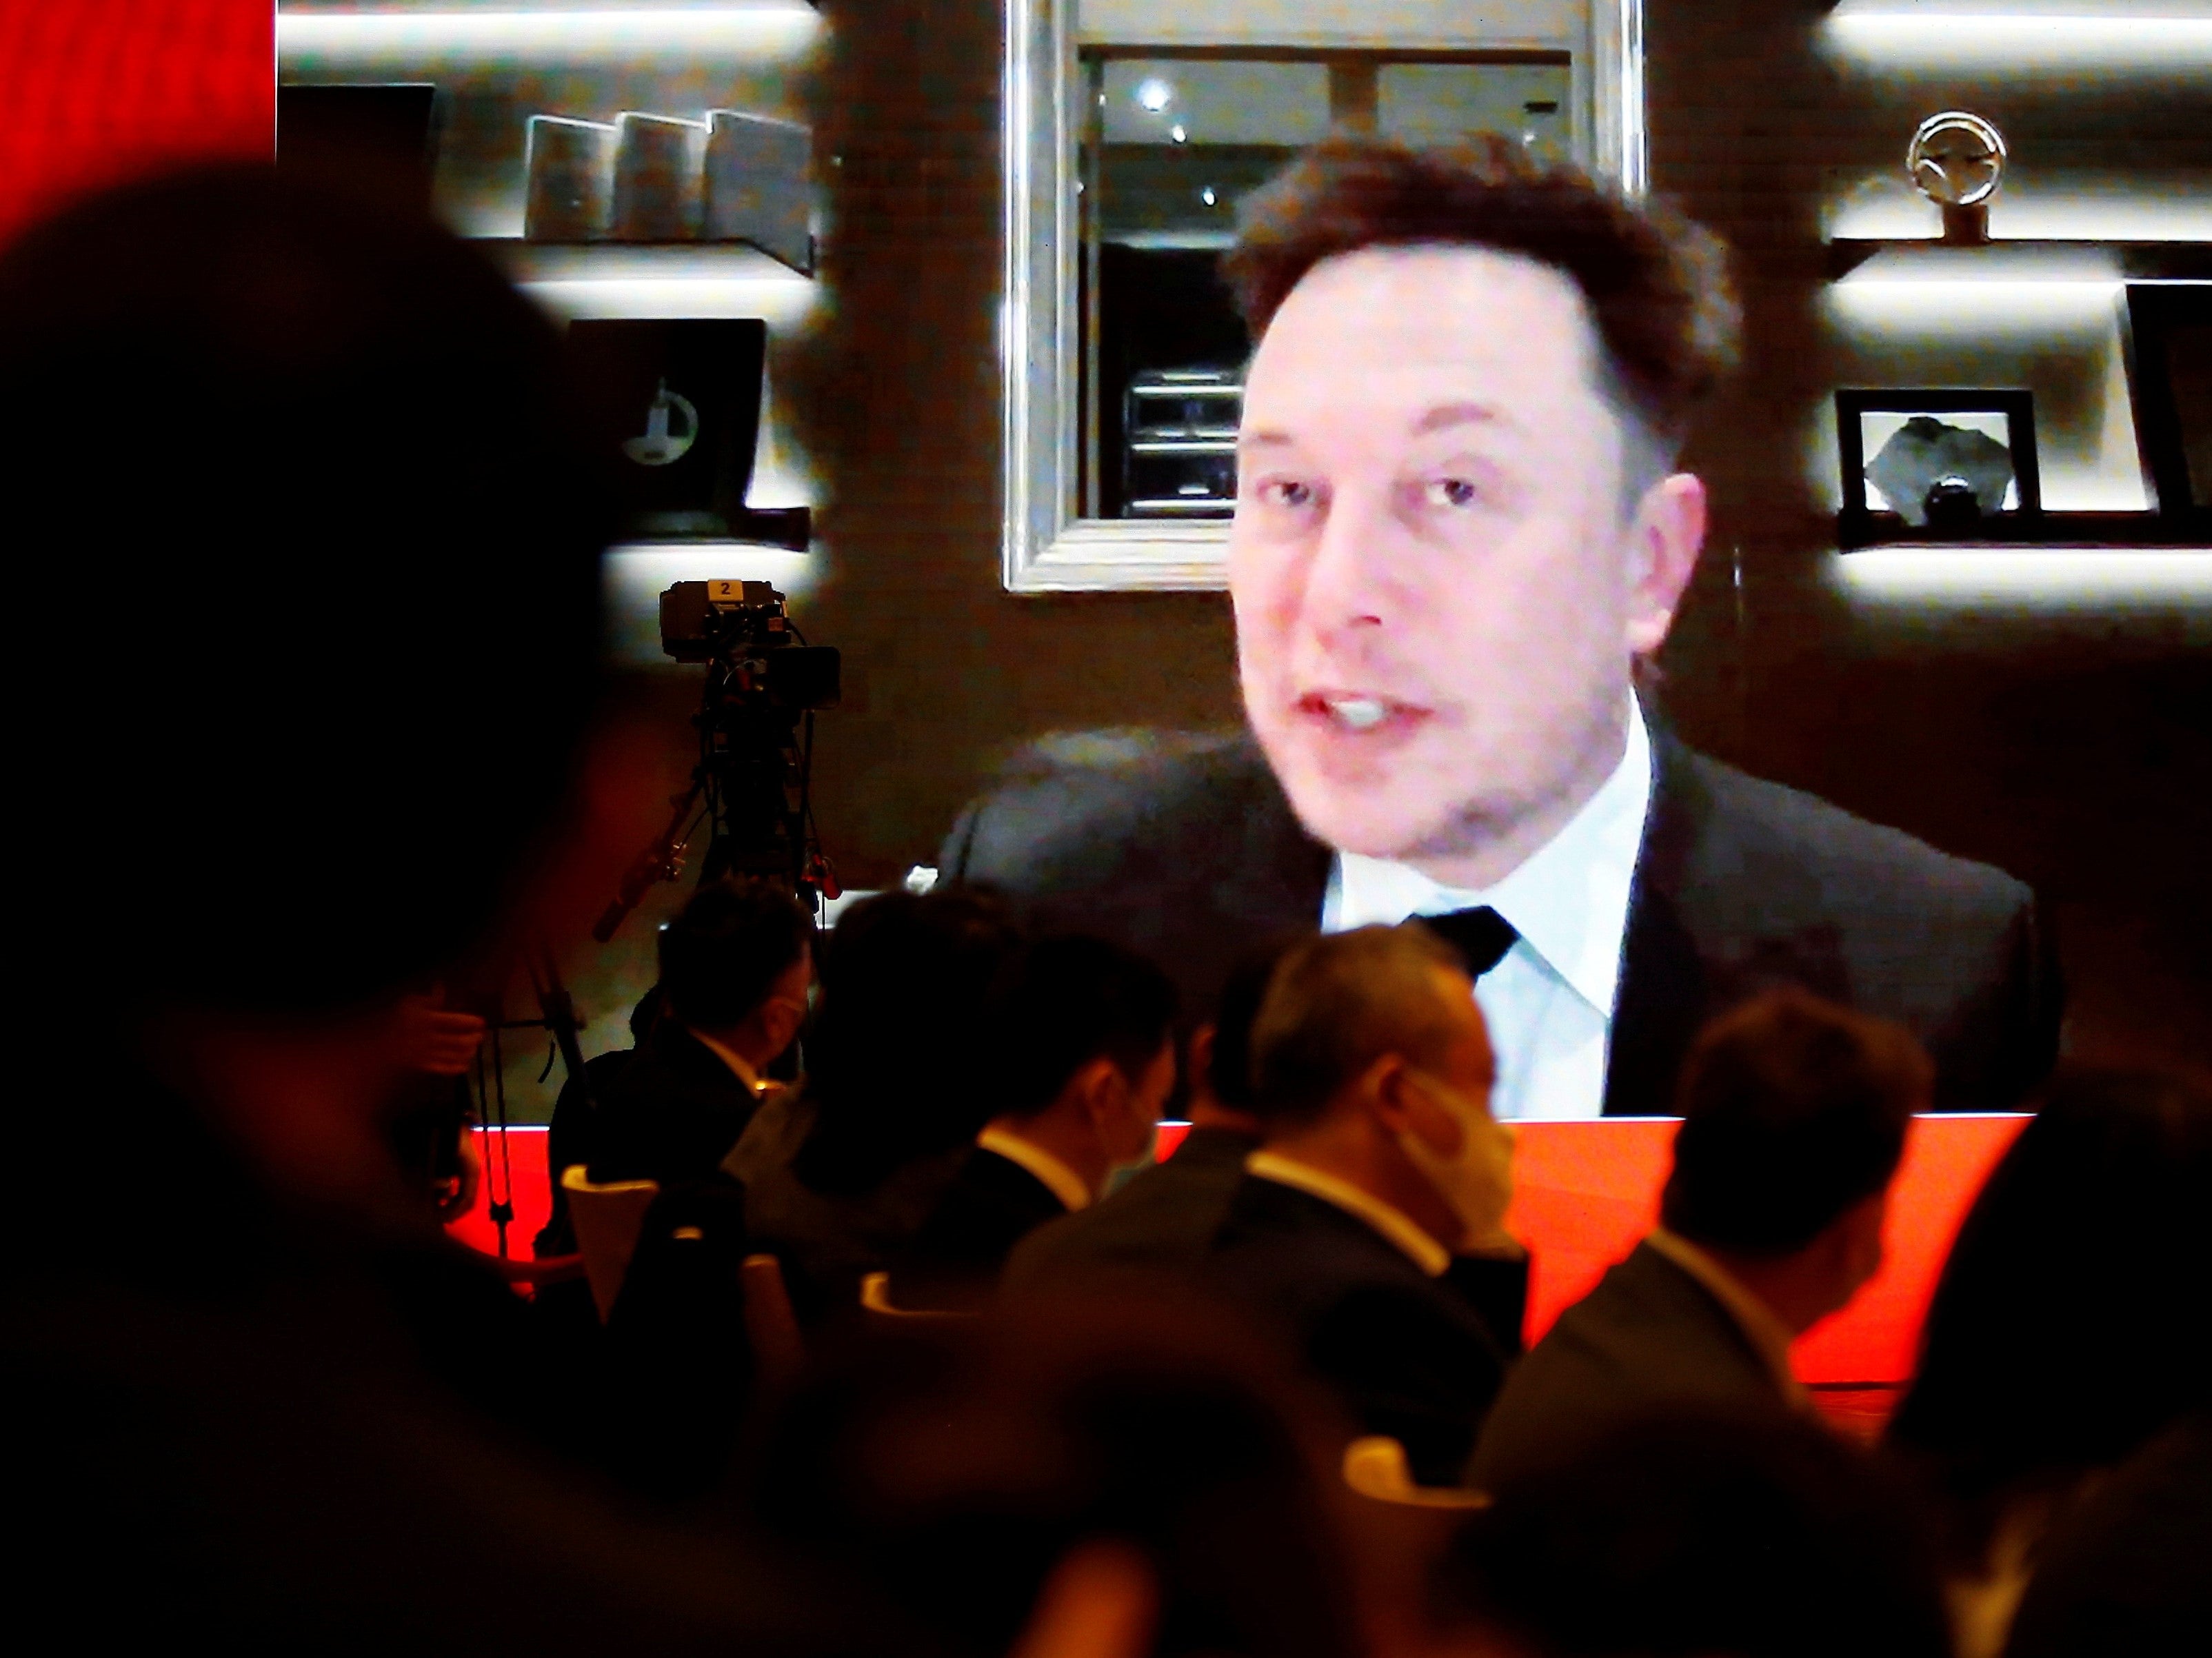 Tesla CEO Elon Musk attends via video link a session at the China Development Forum held in Beijing, China 20 March, 2021